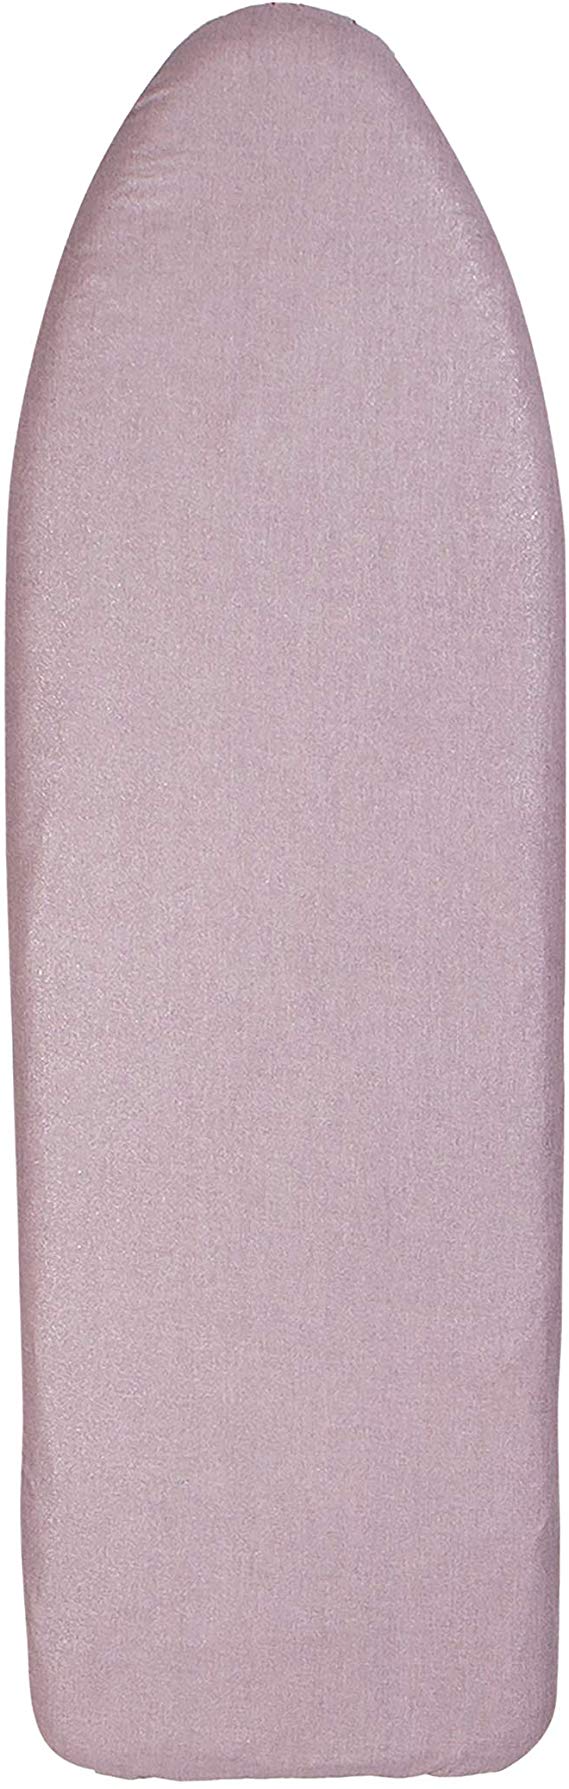 Simplify Scorch Resistant Silicone Coated Ironing Board Padded Cover with Elastic Edges and Velcro Strap 15" x 54", 1 Pack, Plum